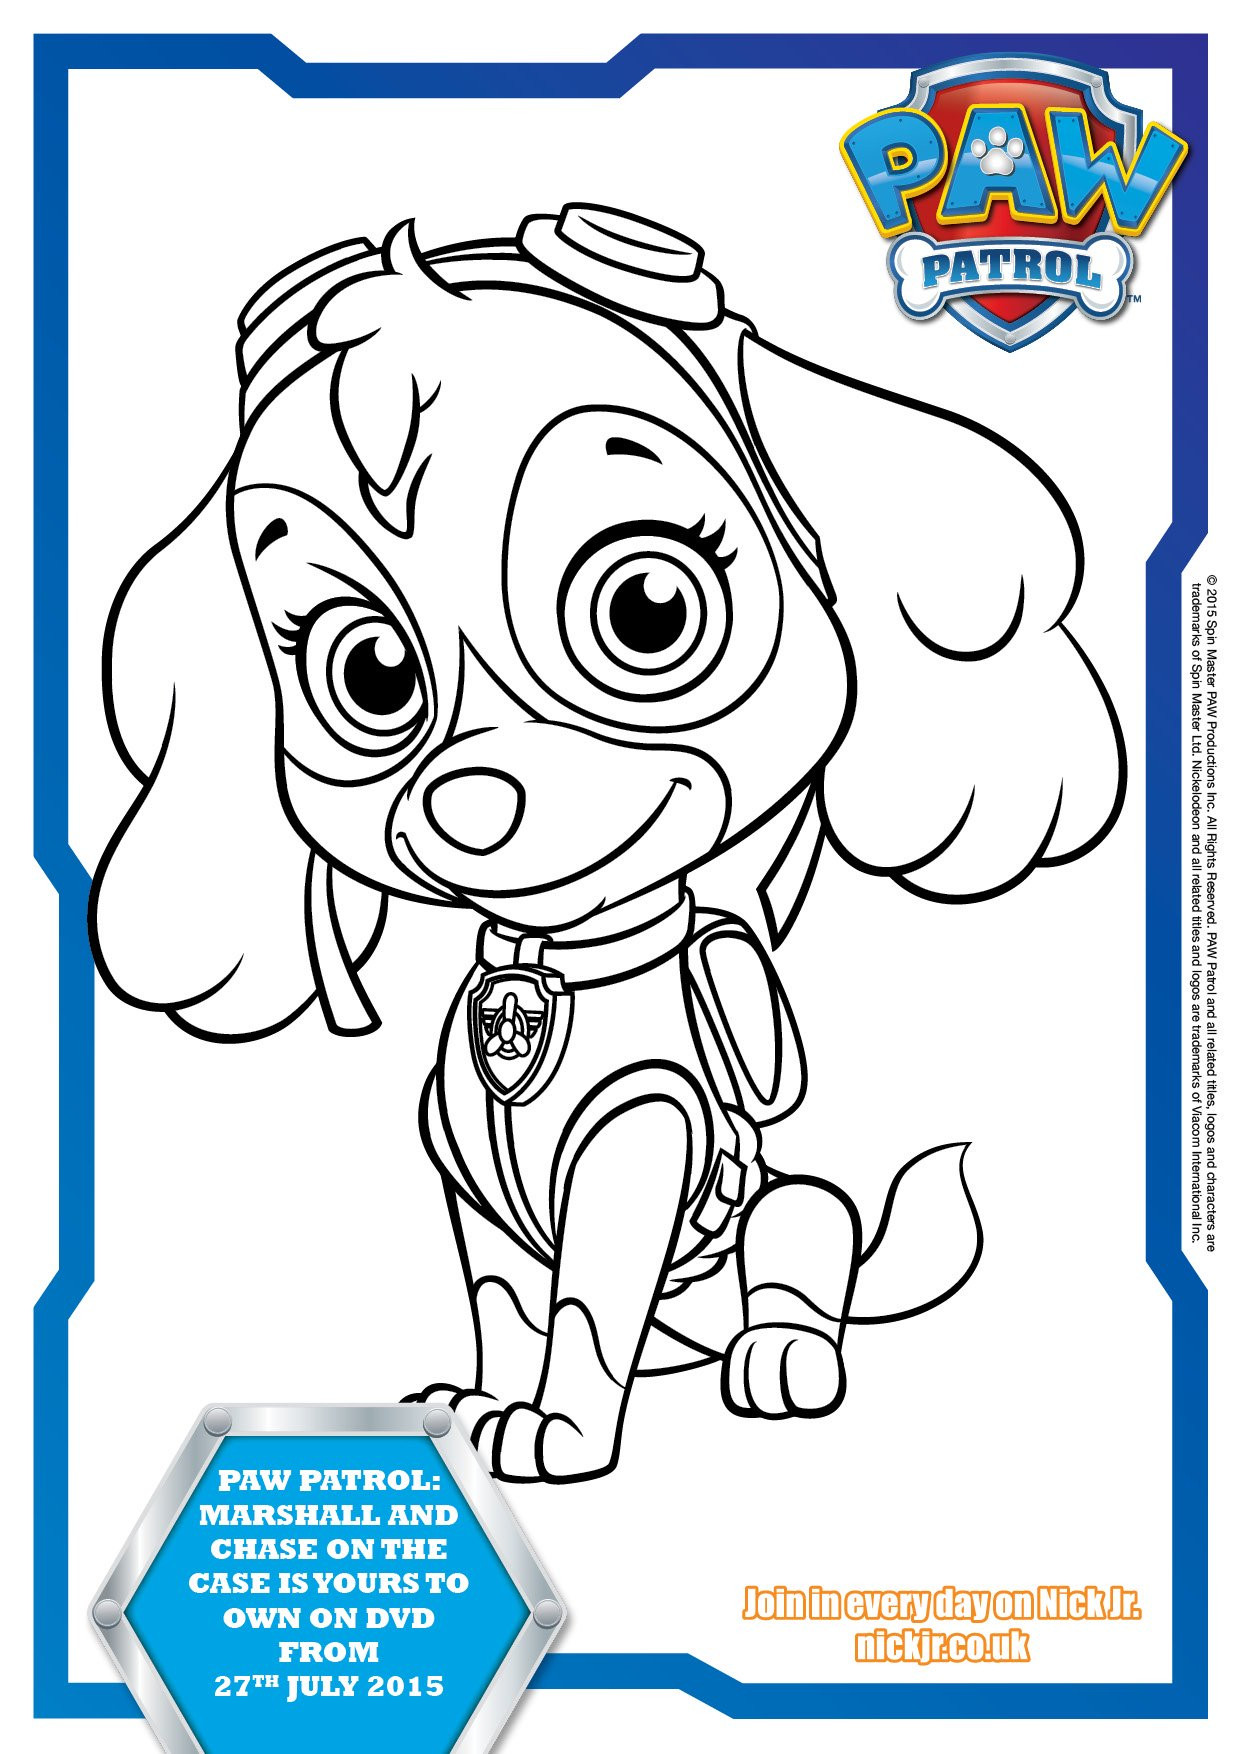 Paw Patrol Coloring Pages For Kids
 Paw Patrol Colouring Pages and Activity Sheets In The